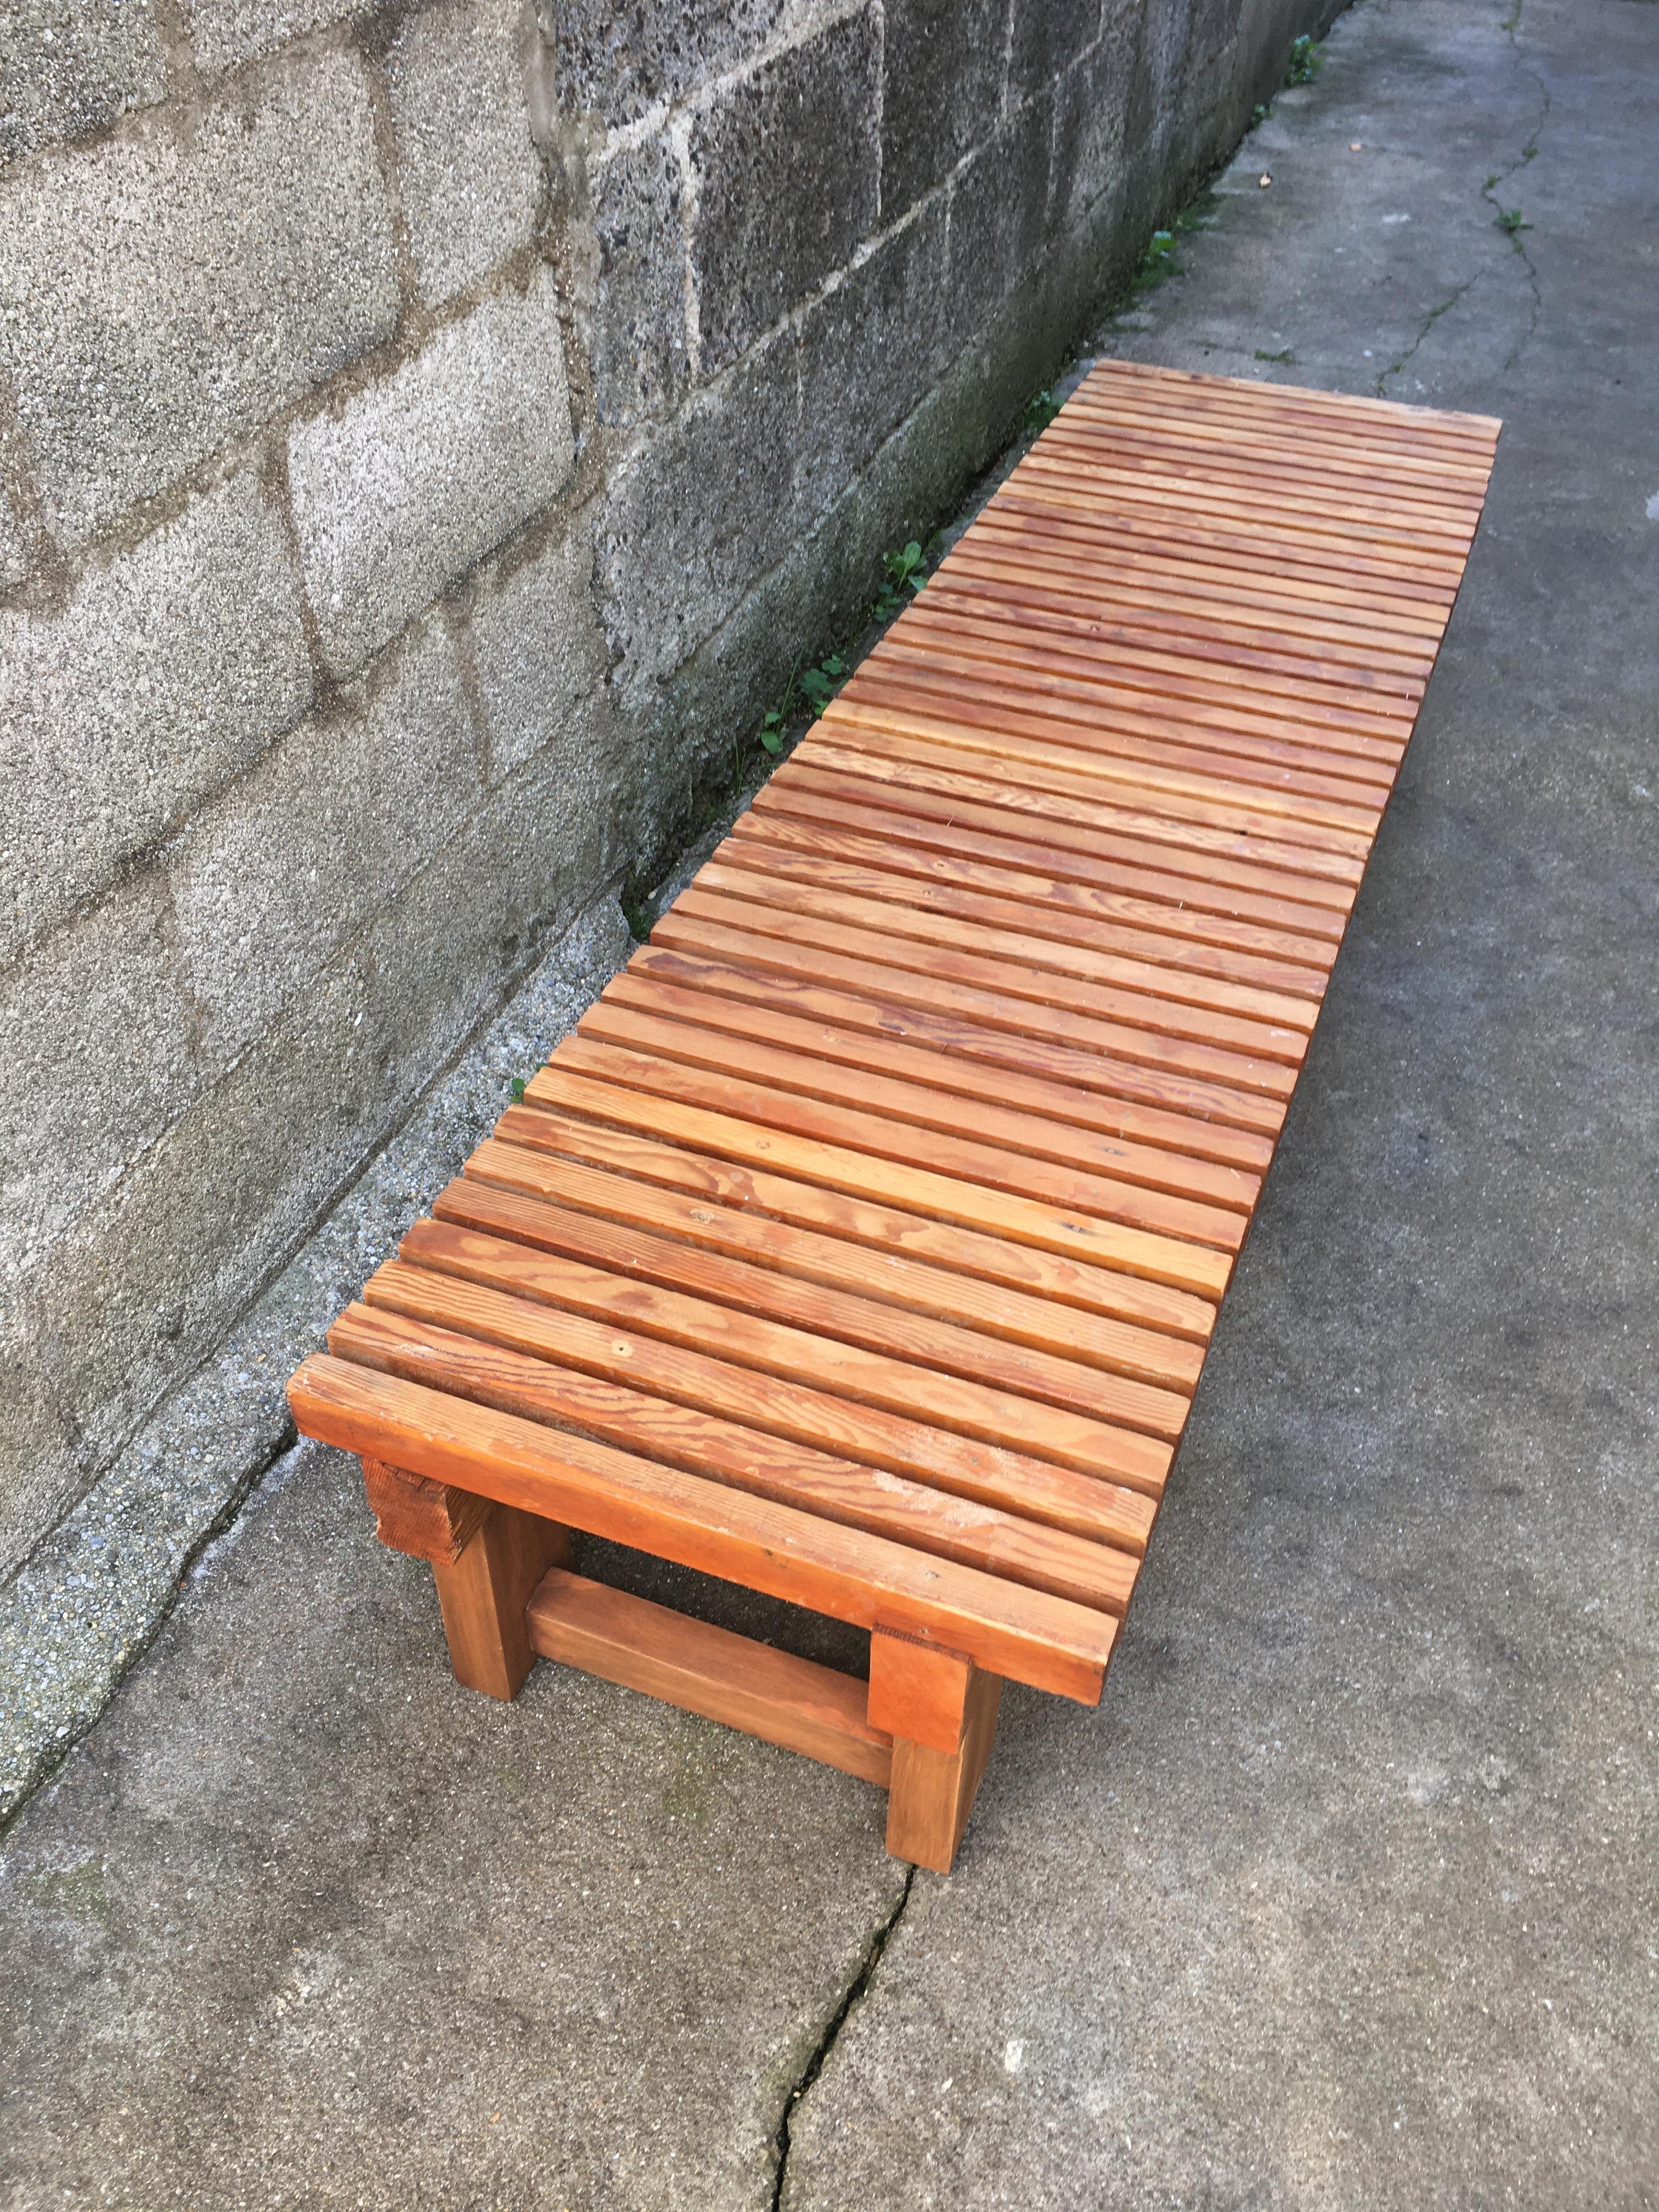 Charlotte Perriand 
Duckboard bench 
Larch
For the 3 arches 
circa 1969
Steph Simon Edition

Measures: 230 W x 75 D x 35.5 H
10900 euros each 
(2 available).